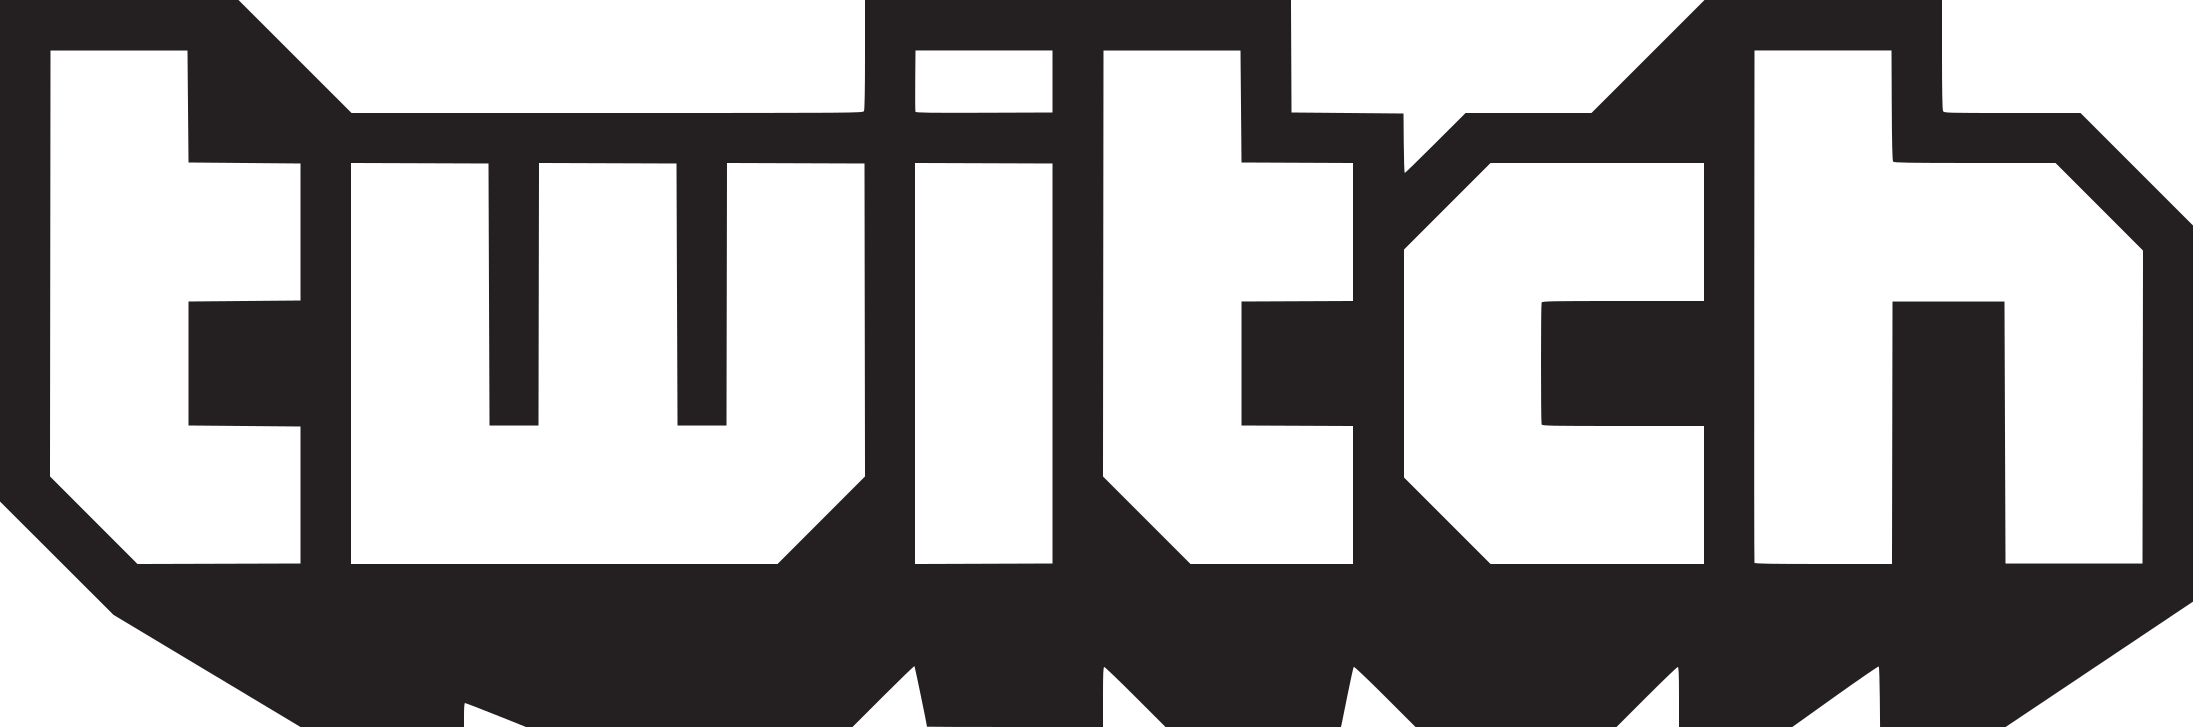 A large black and white Twitch.tv logo